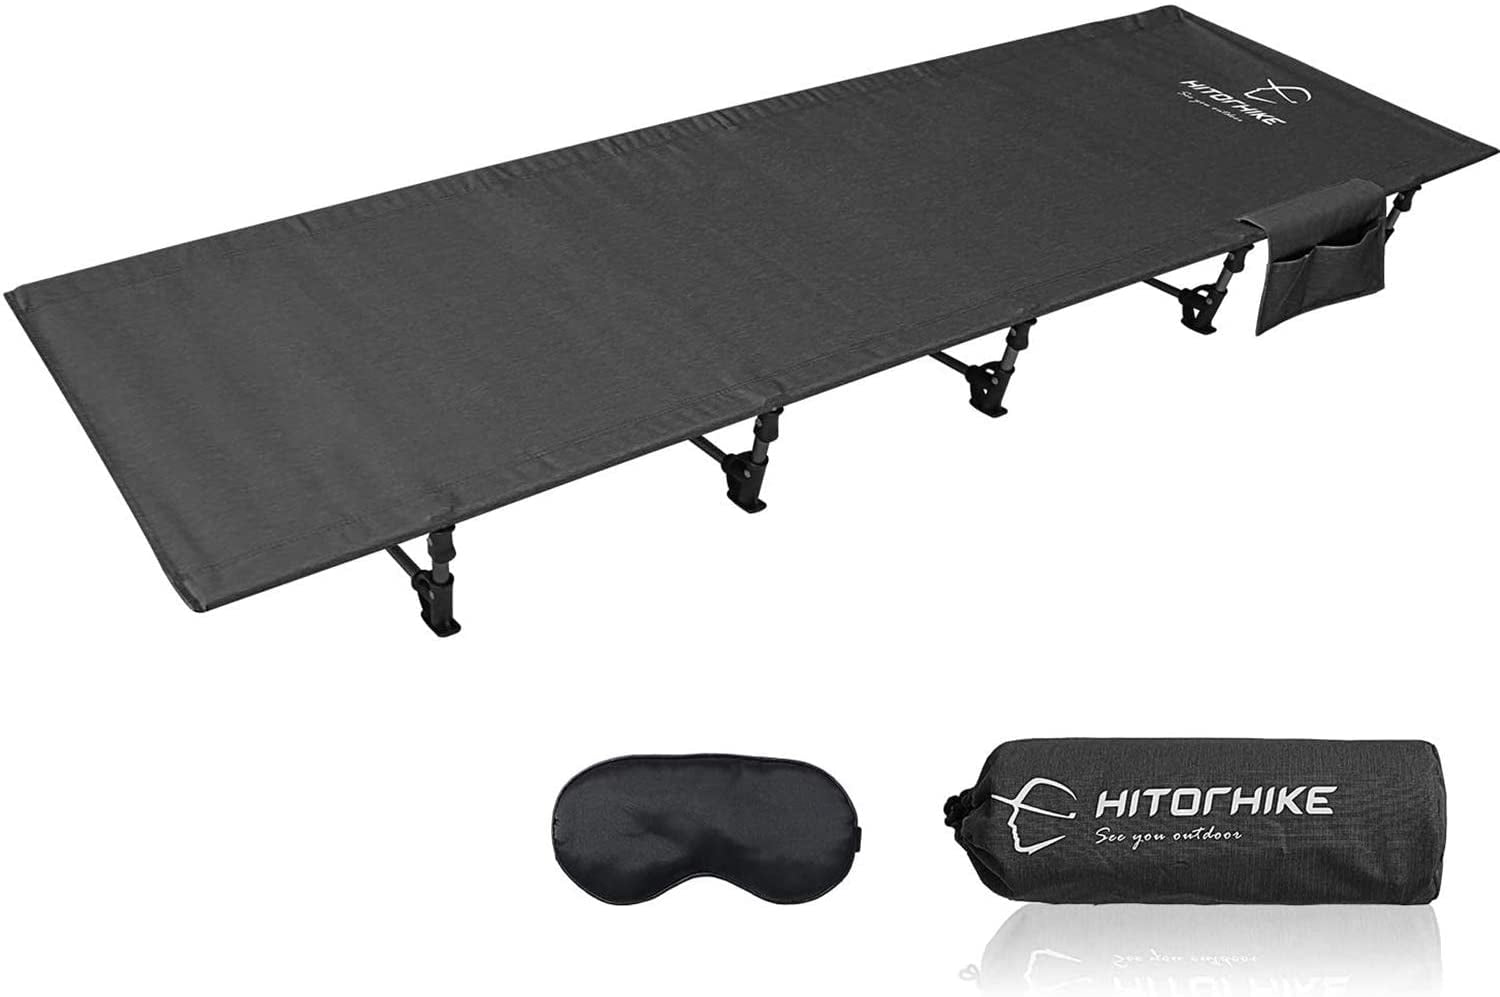 HITORHIKE Camping Cot Compact Folding Cot Bed for Outdoor Backpacking  Camping Cot Bed